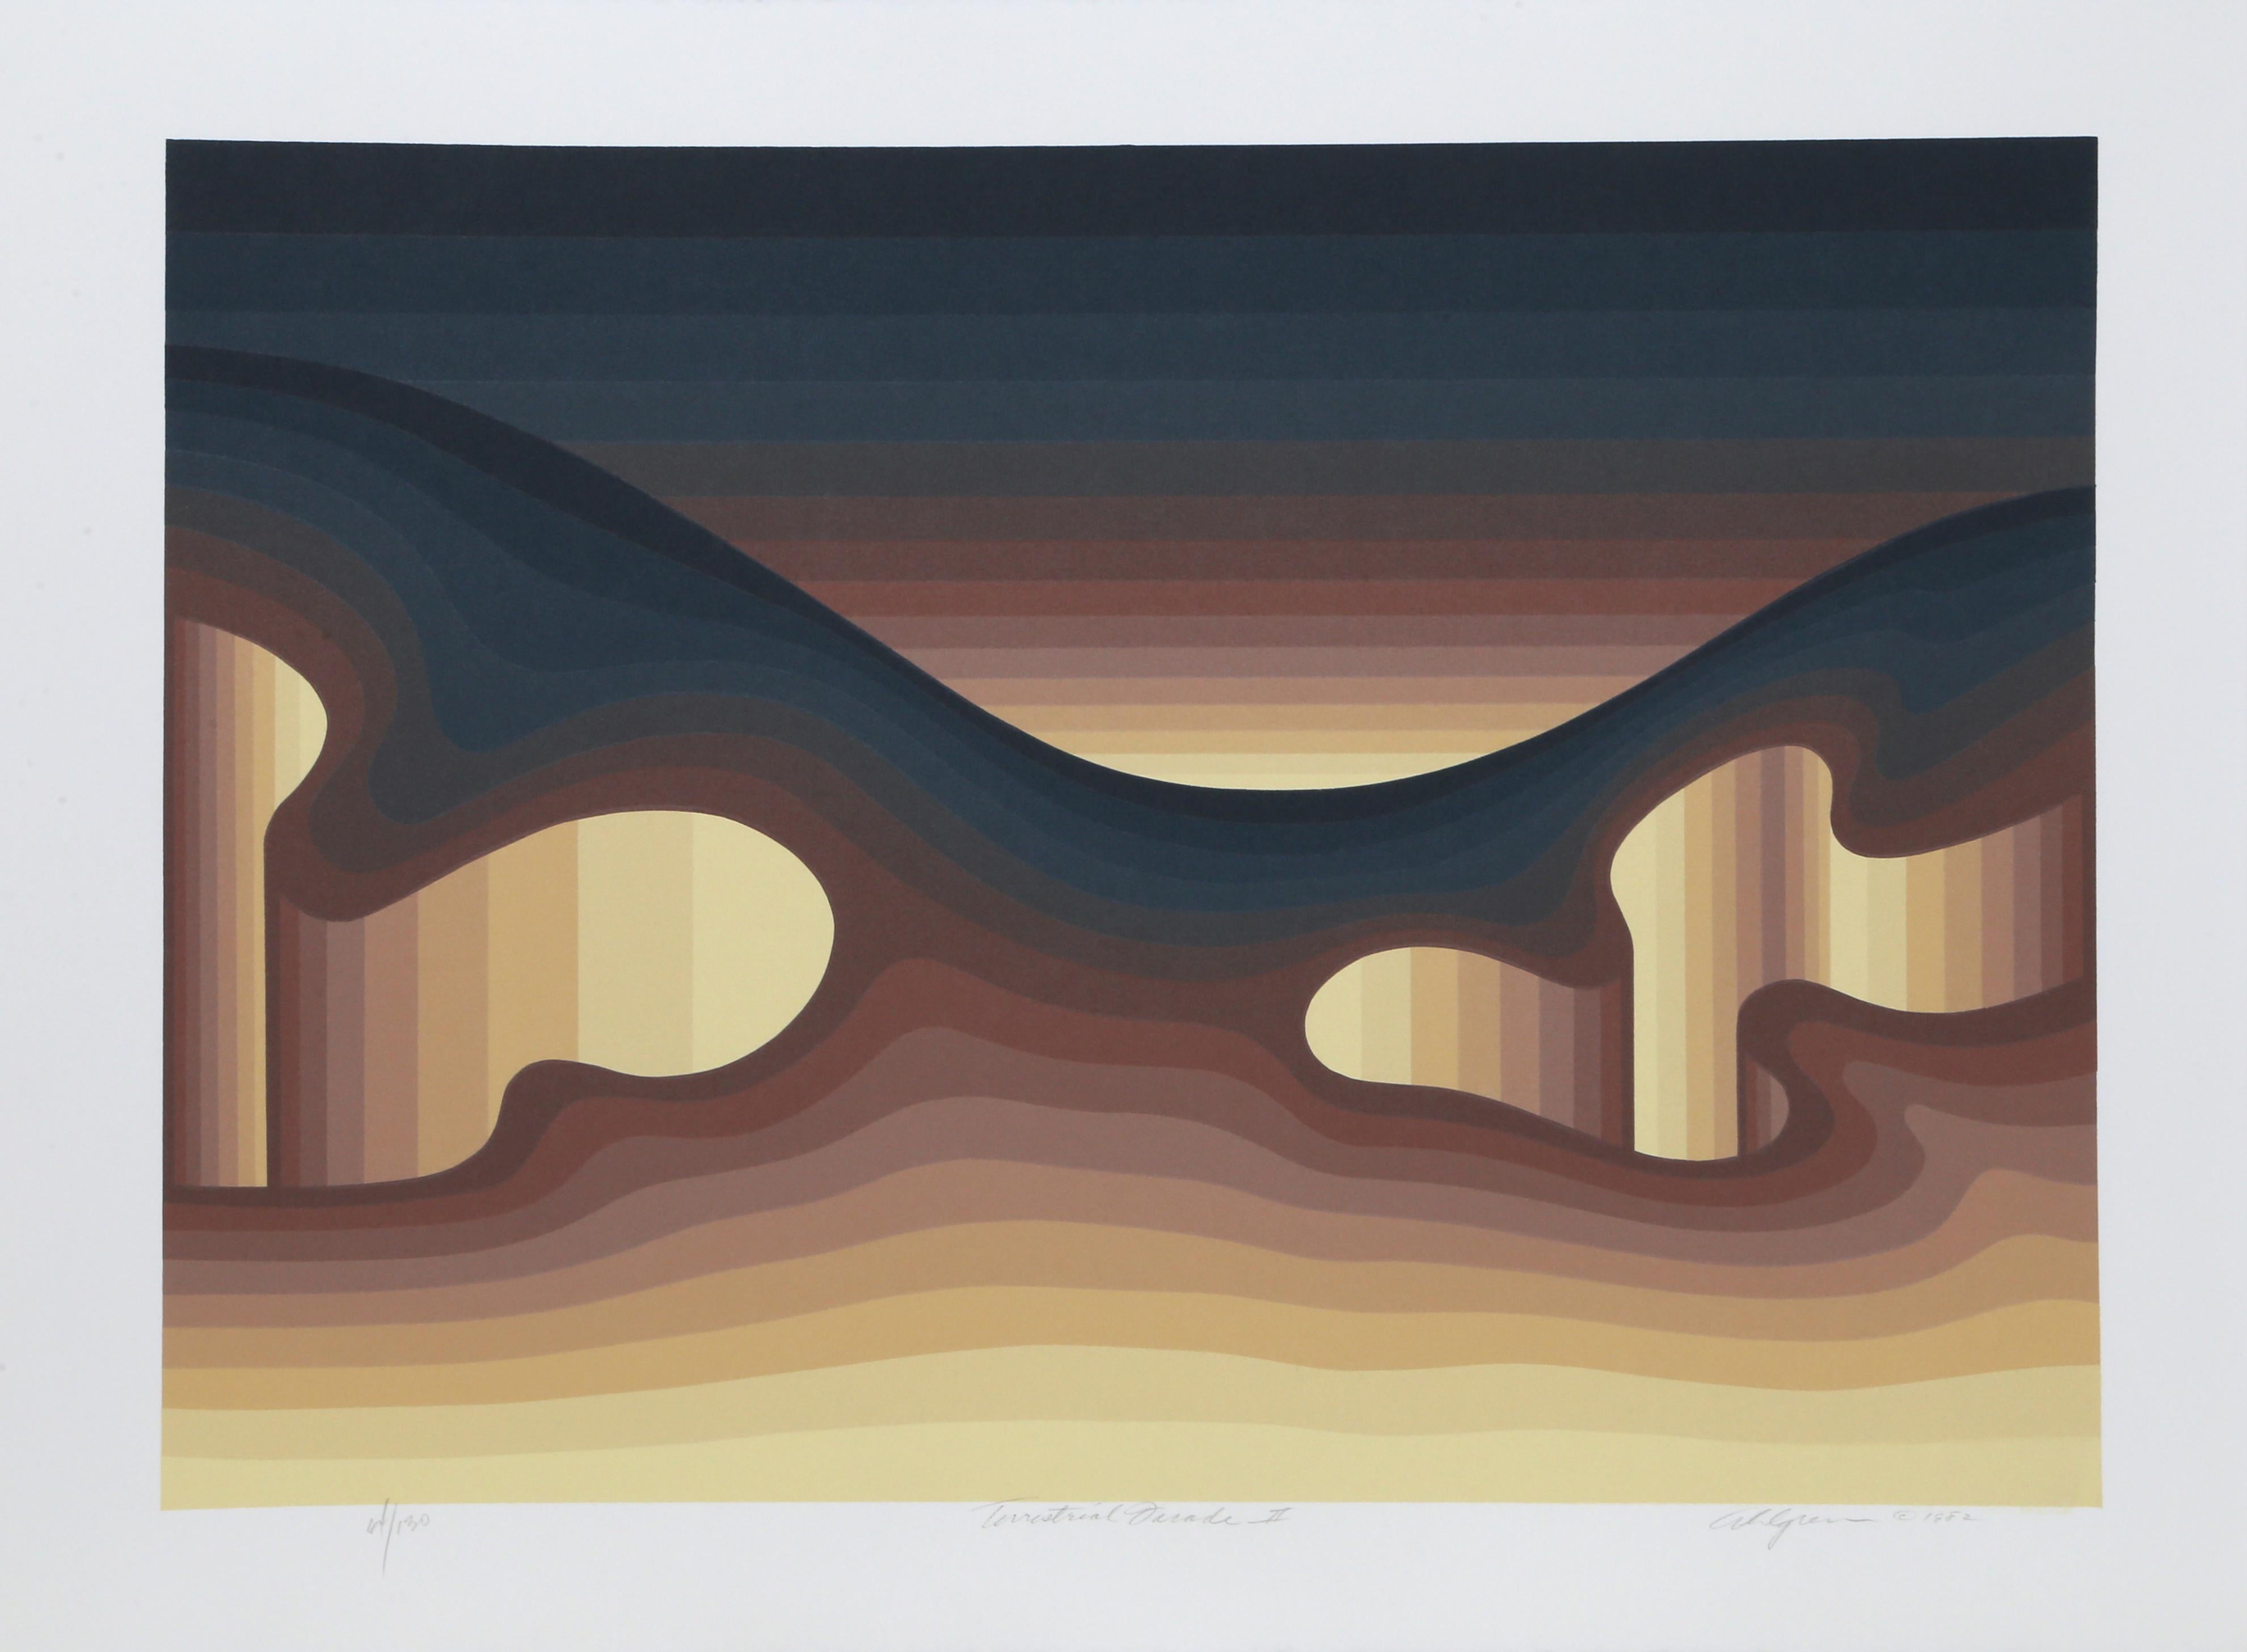 Artist: Roy Ahlgren, American (1927 - 2011)
Title: Terrestrial Facade II
Year: 1982
Medium: Serigraph, signed and numbered in pencil
Edition: 130
Image Size: 18 x 25.5 inches
Size: 22.5 x 30 in. (57.15 x 76.2 cm)